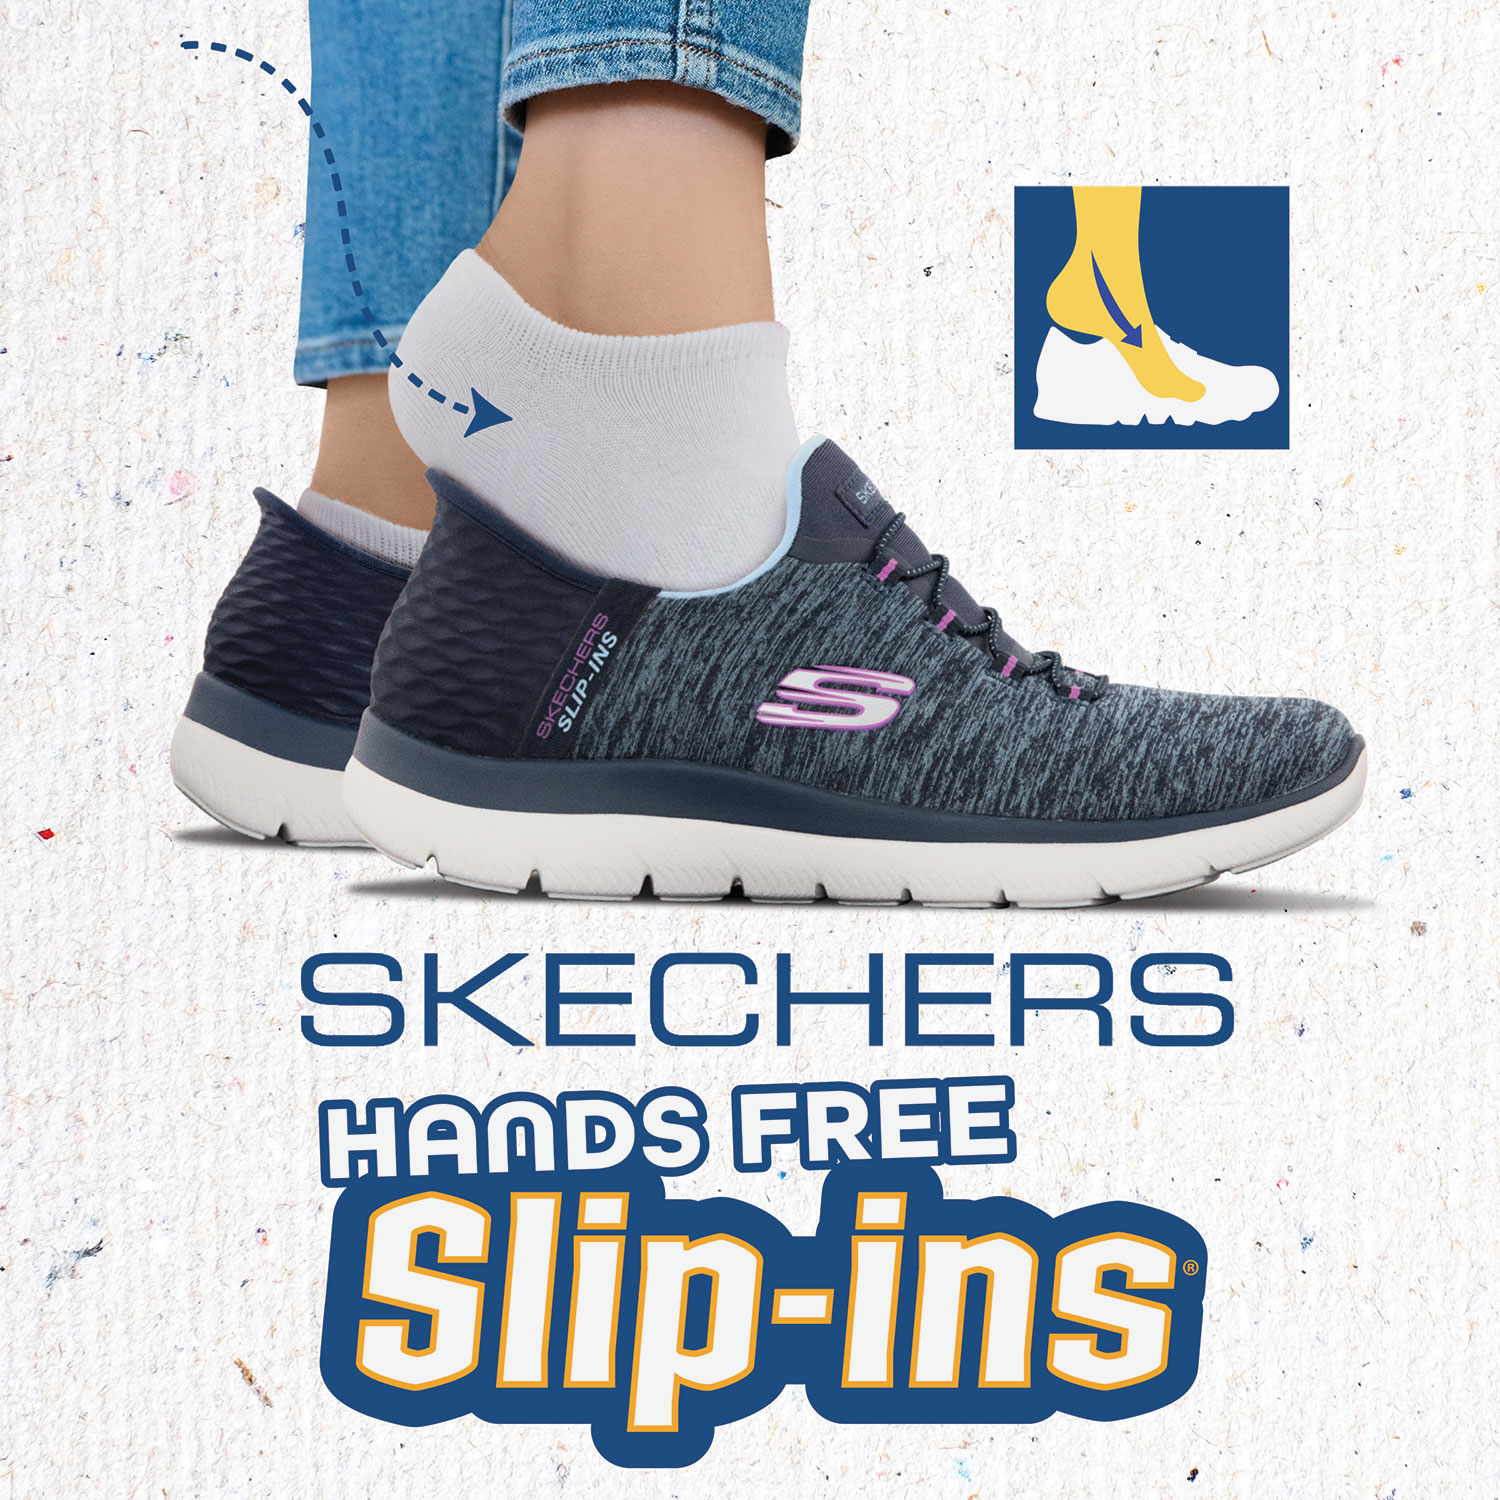 Product image for Skechers Relaxed Fit Comfort Slip-On Shoes